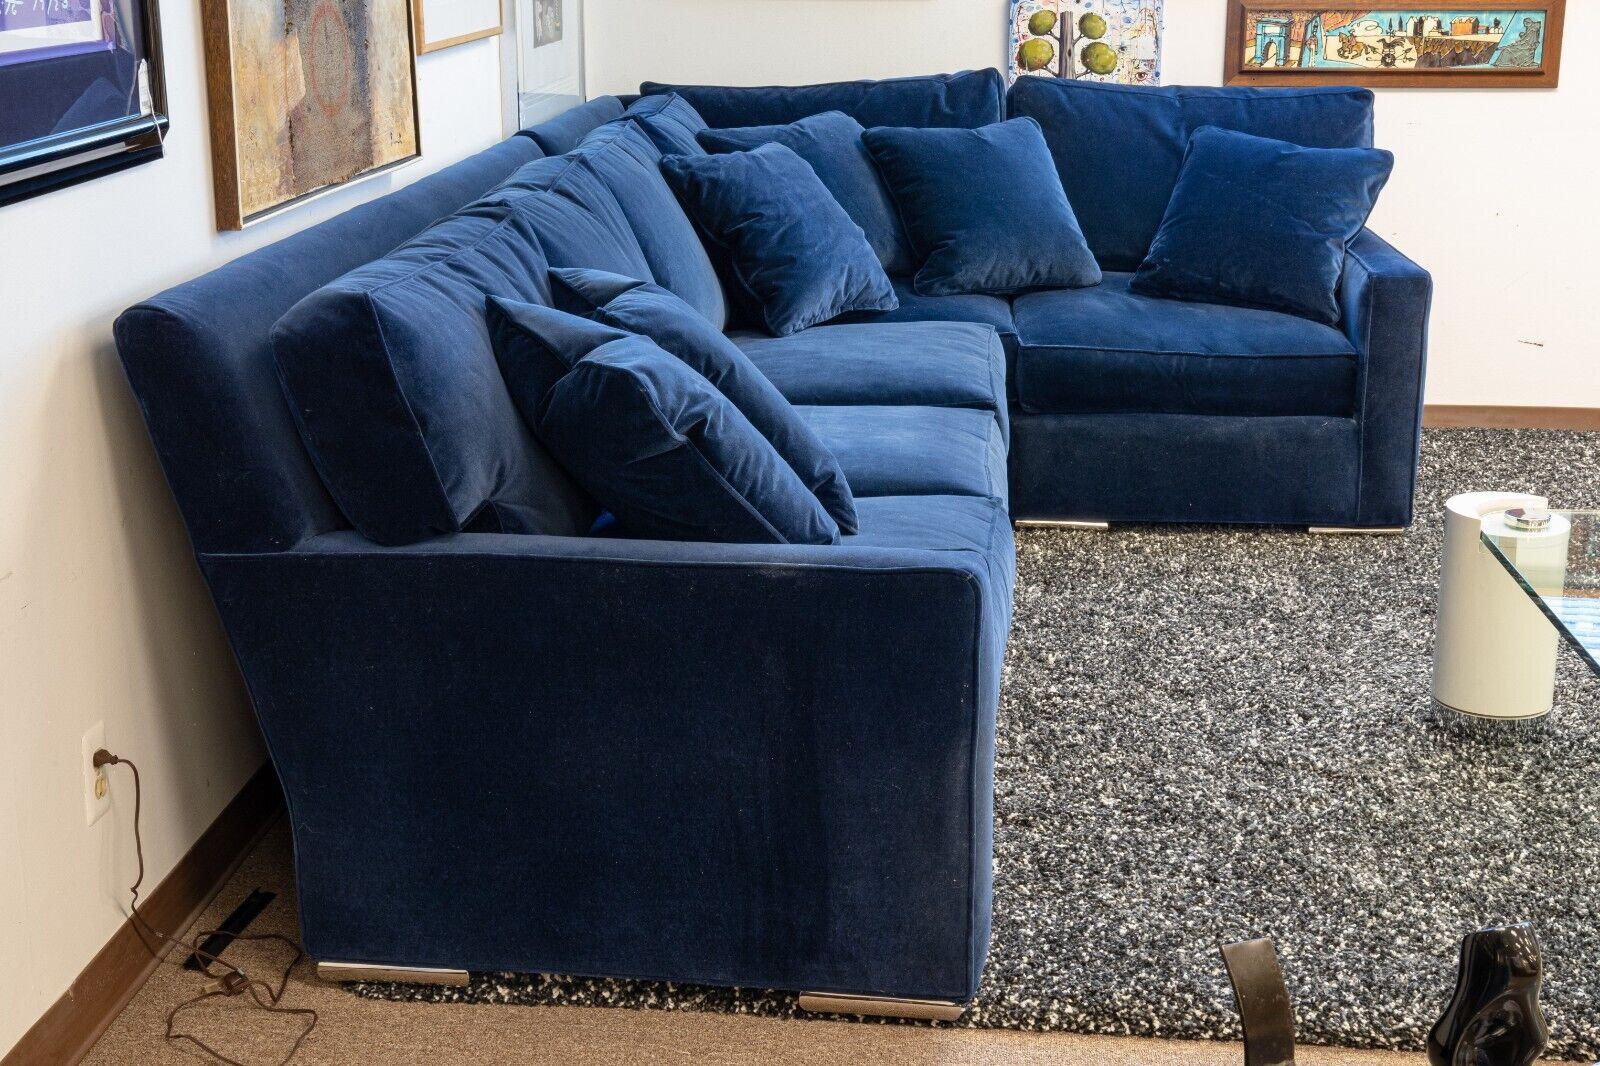 A Century Furniture blue velvet and chrome sofa sectional. This wonderous sofa sectional features a deep blue velvet upholstery with chrome detailing on the legs, and a three piece sectional design. The blue velvet that covers the entirety of this